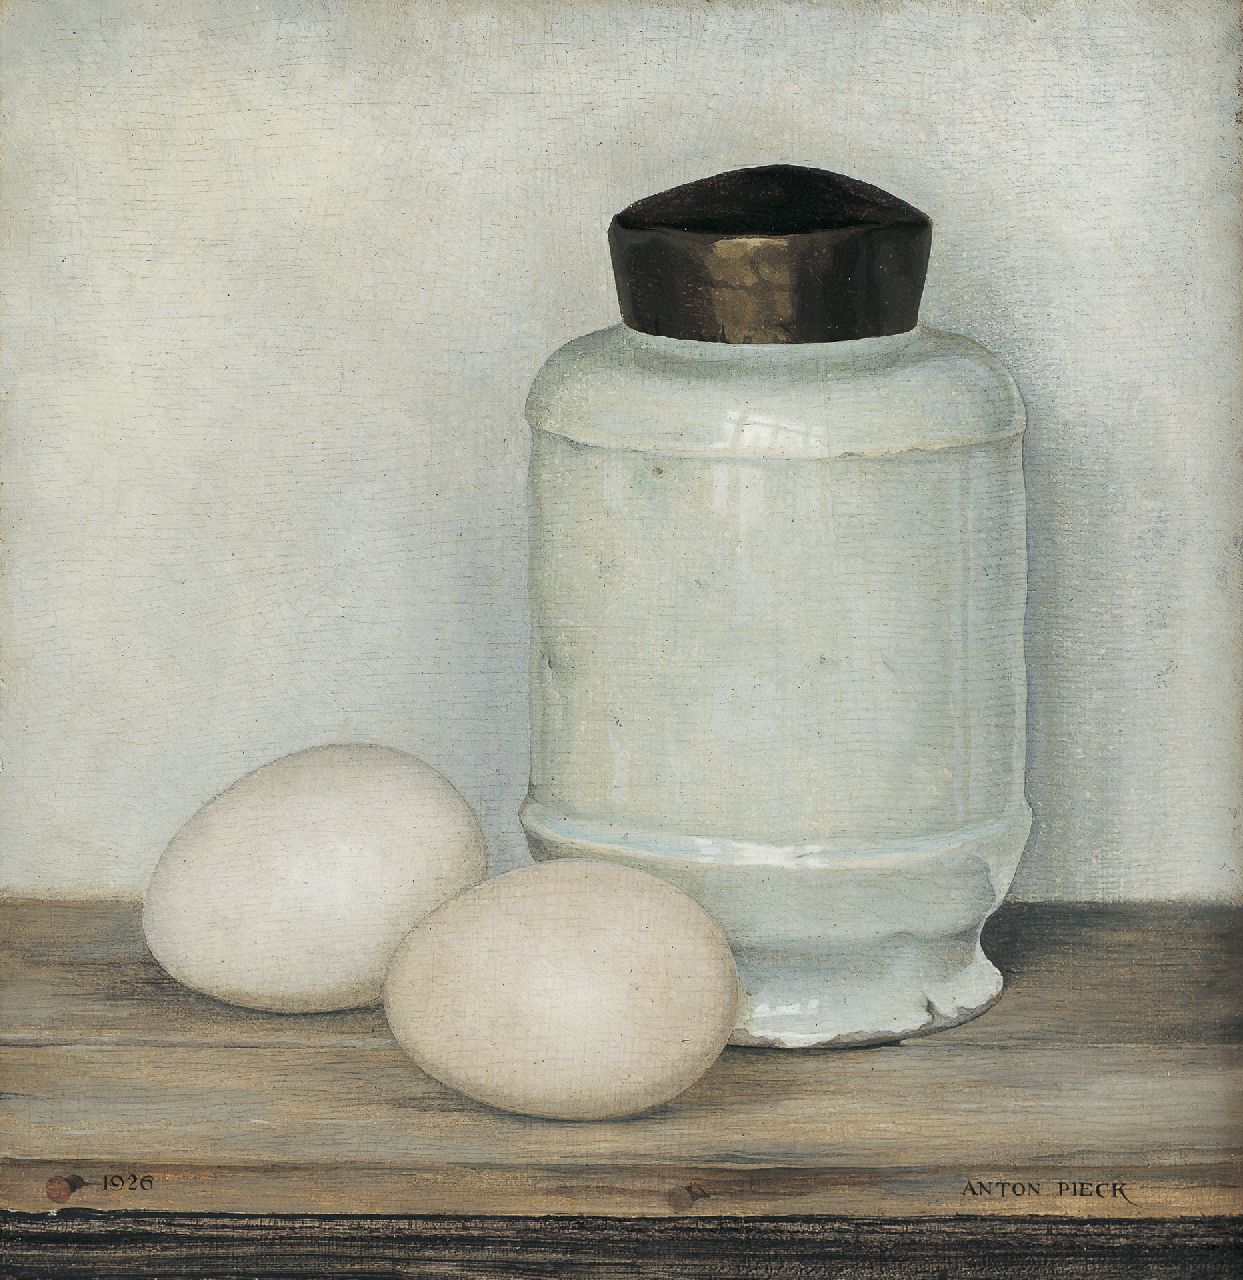 Pieck A.F.  | 'Anton' Franciscus Pieck, A white pot and two eggs, Öl auf Holz 20,5 x 20,0 cm, signed l.r. und dated 1926